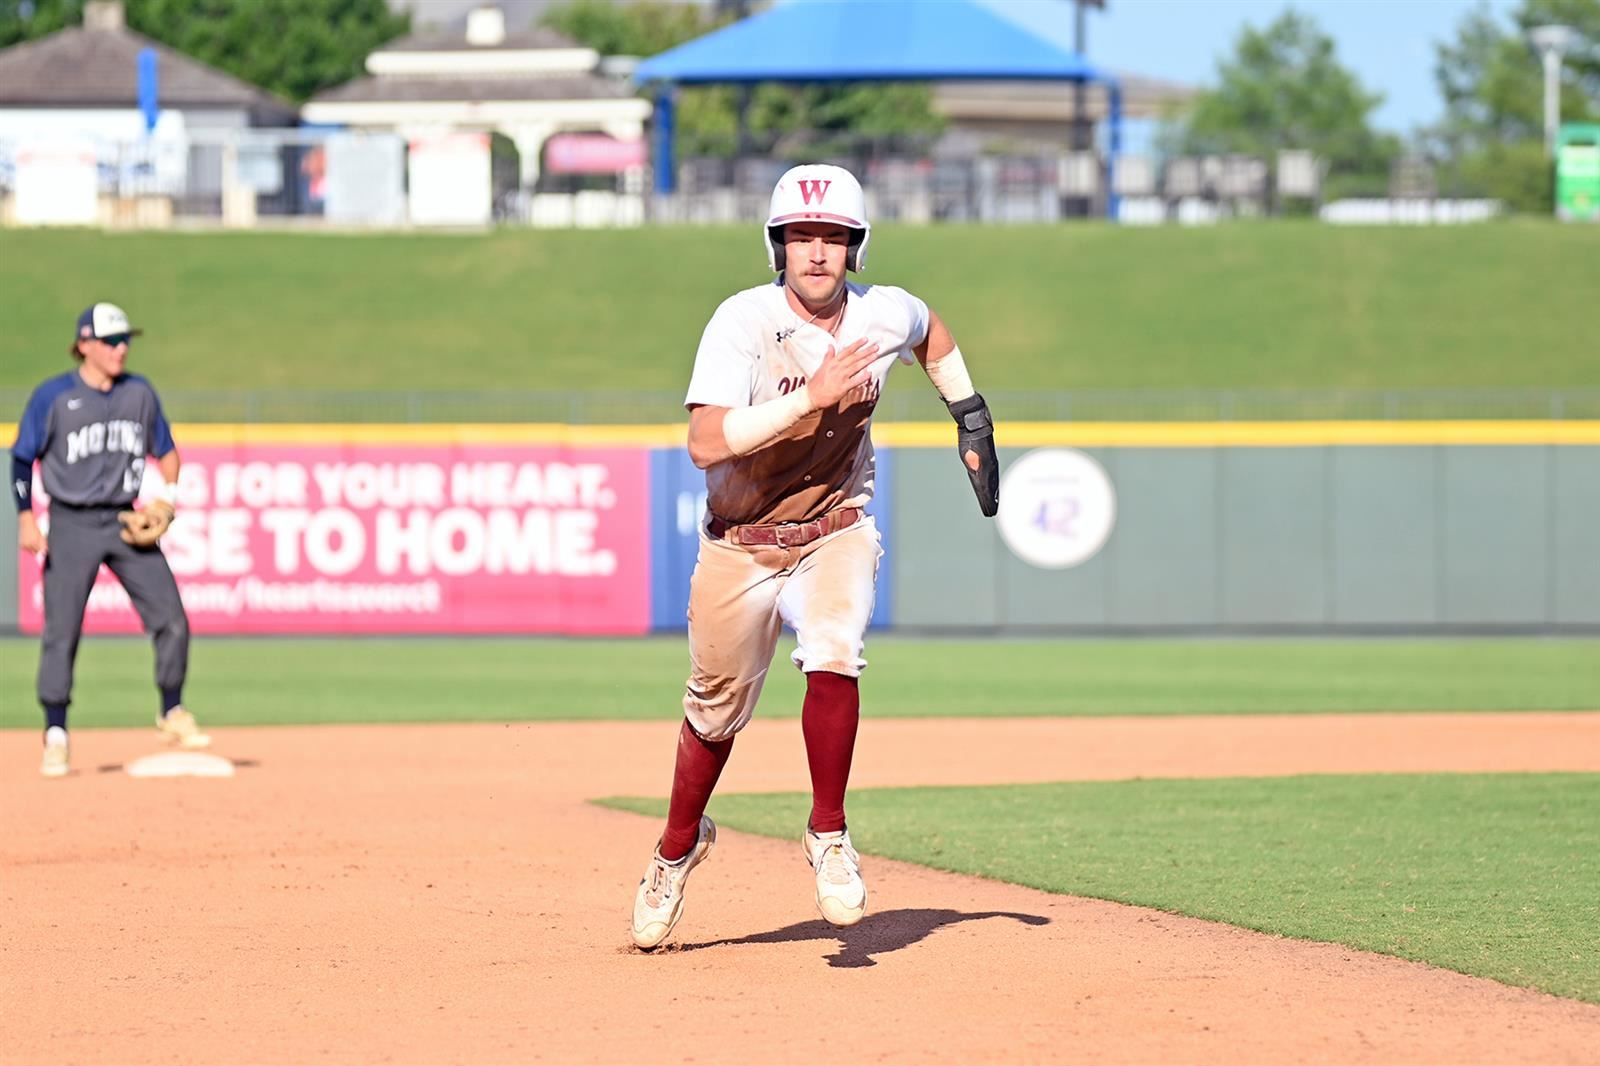 Cypress Woods High School senior outfielder Brady Sullivan was named to the Class 6A State Baseball All-Tournament Team.